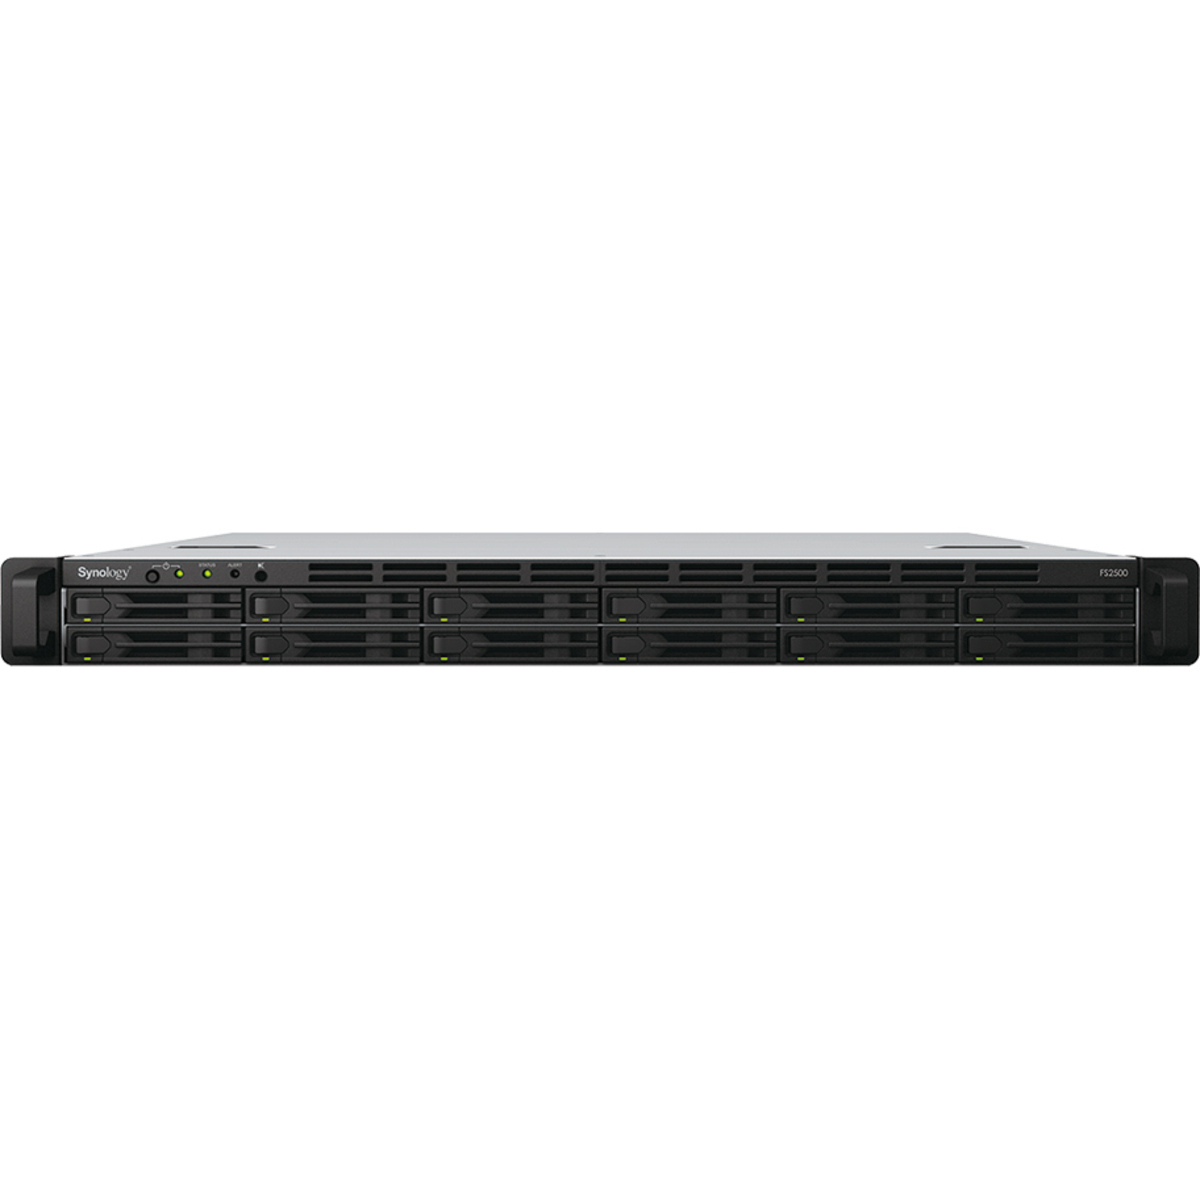 Synology FlashStation FS2500 6tb 12-Bay RackMount Large Business / Enterprise NAS - Network Attached Storage Device 12x500gb Crucial MX500 CT500MX500SSD1 2.5 560/510MB/s SATA 6Gb/s SSD CONSUMER Class Drives Installed - Burn-In Tested - FREE RAM UPGRADE FlashStation FS2500